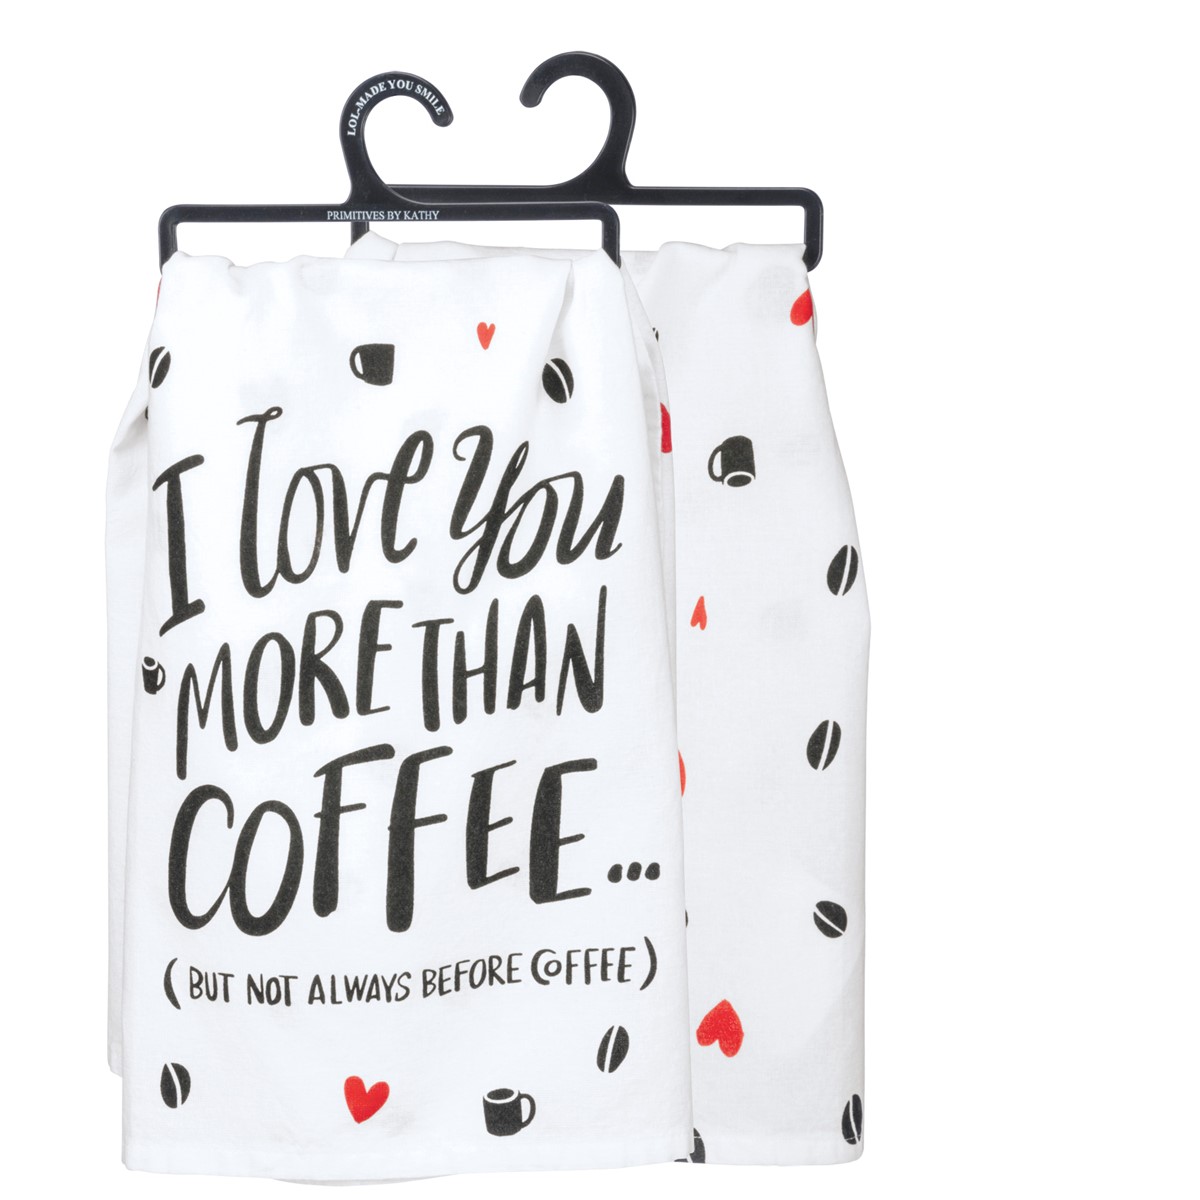 Kitchen Towel - But Not Always Before Coffee - 28" x 28" - Cotton